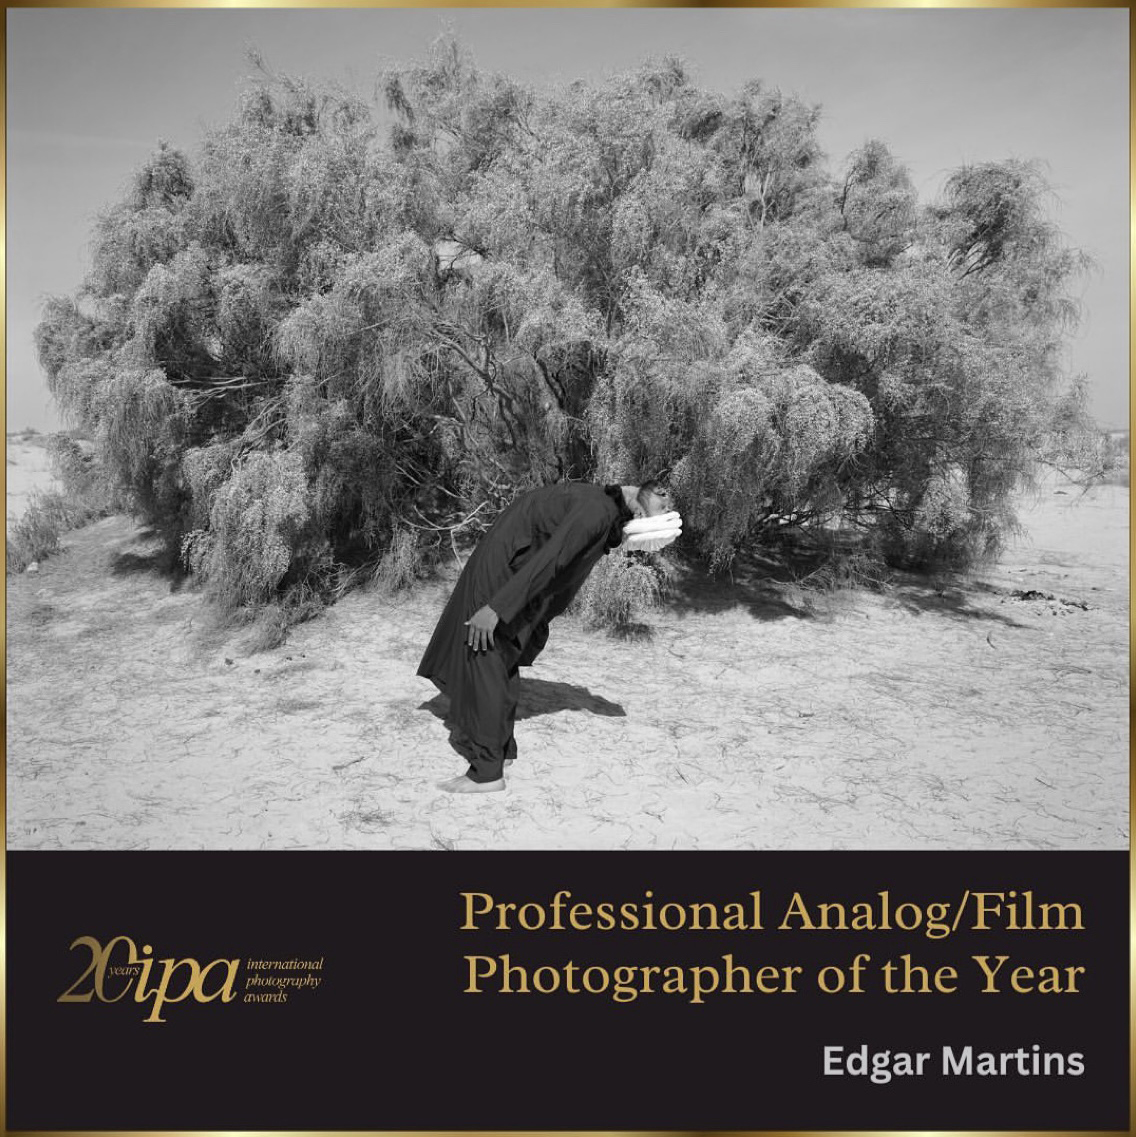 Edgar Martins wins Film photographer of the Year in the International Photography Awards 2023